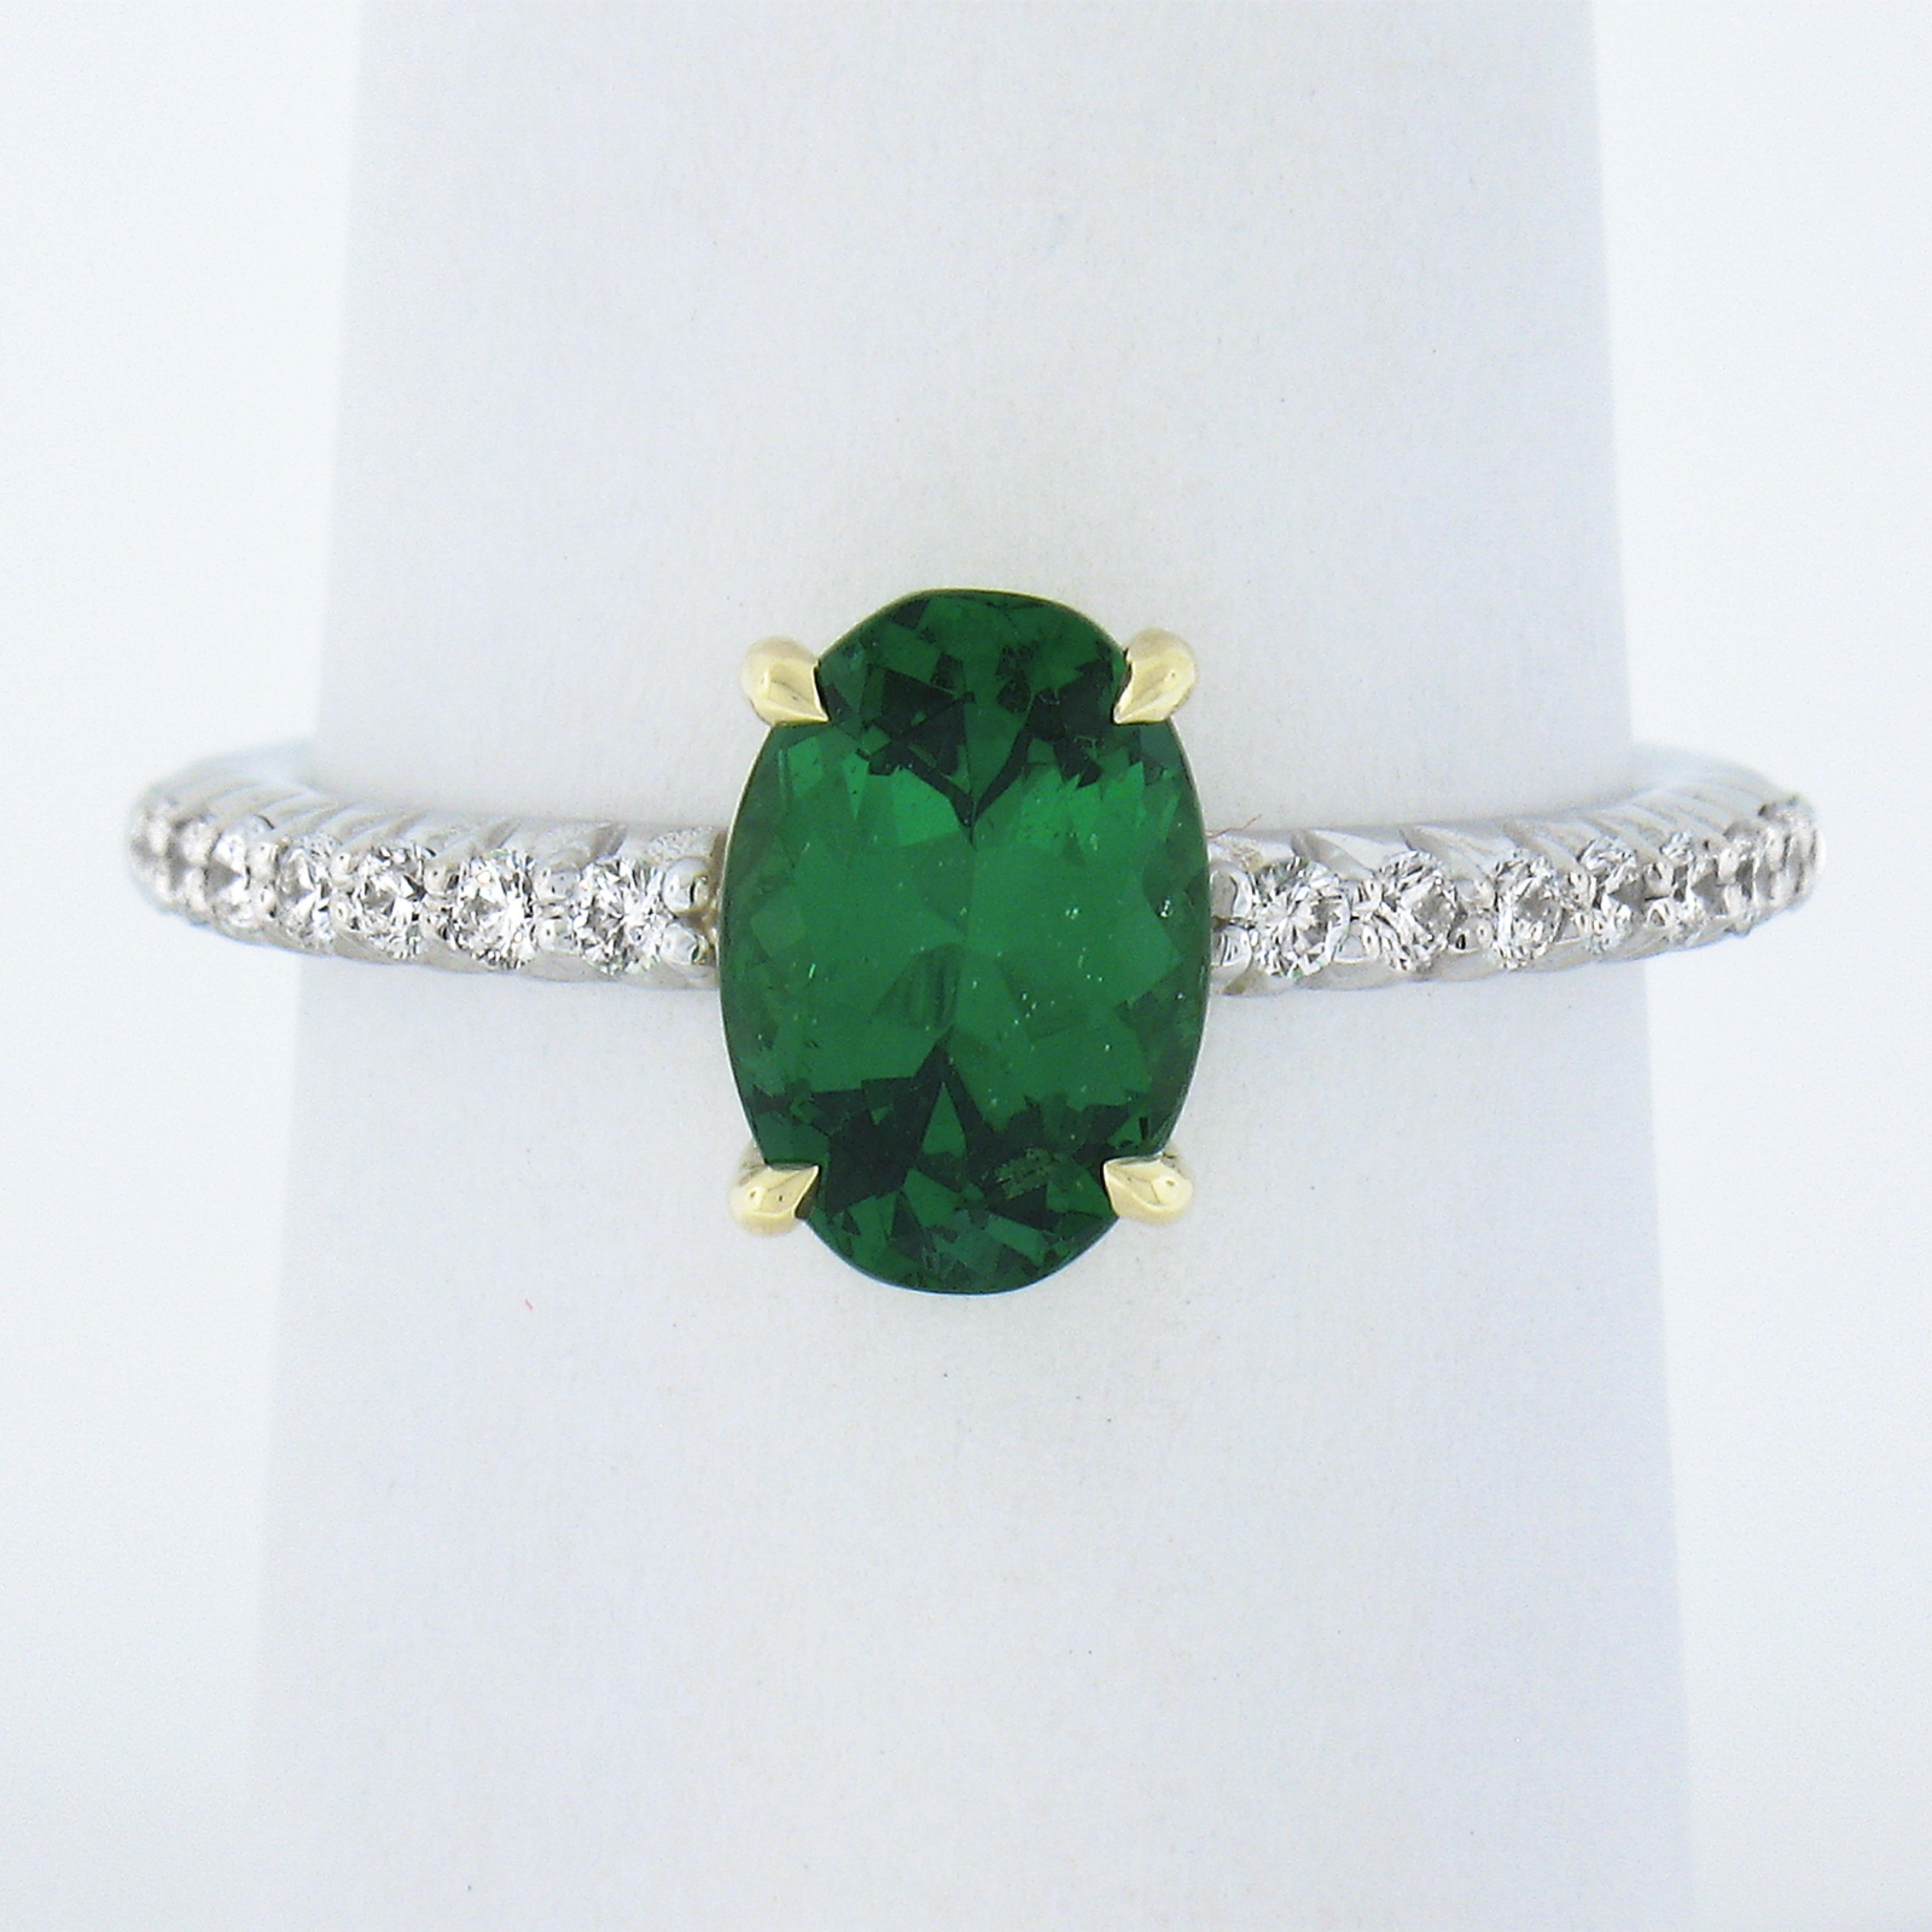 Here we have a beautifully styled tsavorite and diamond ring crafted in solid 14k gold. It is set with a fine quality rich vivid green tsavorite stone neatly claw-prong set in the center yellow gold basket and further adorned on with side of the